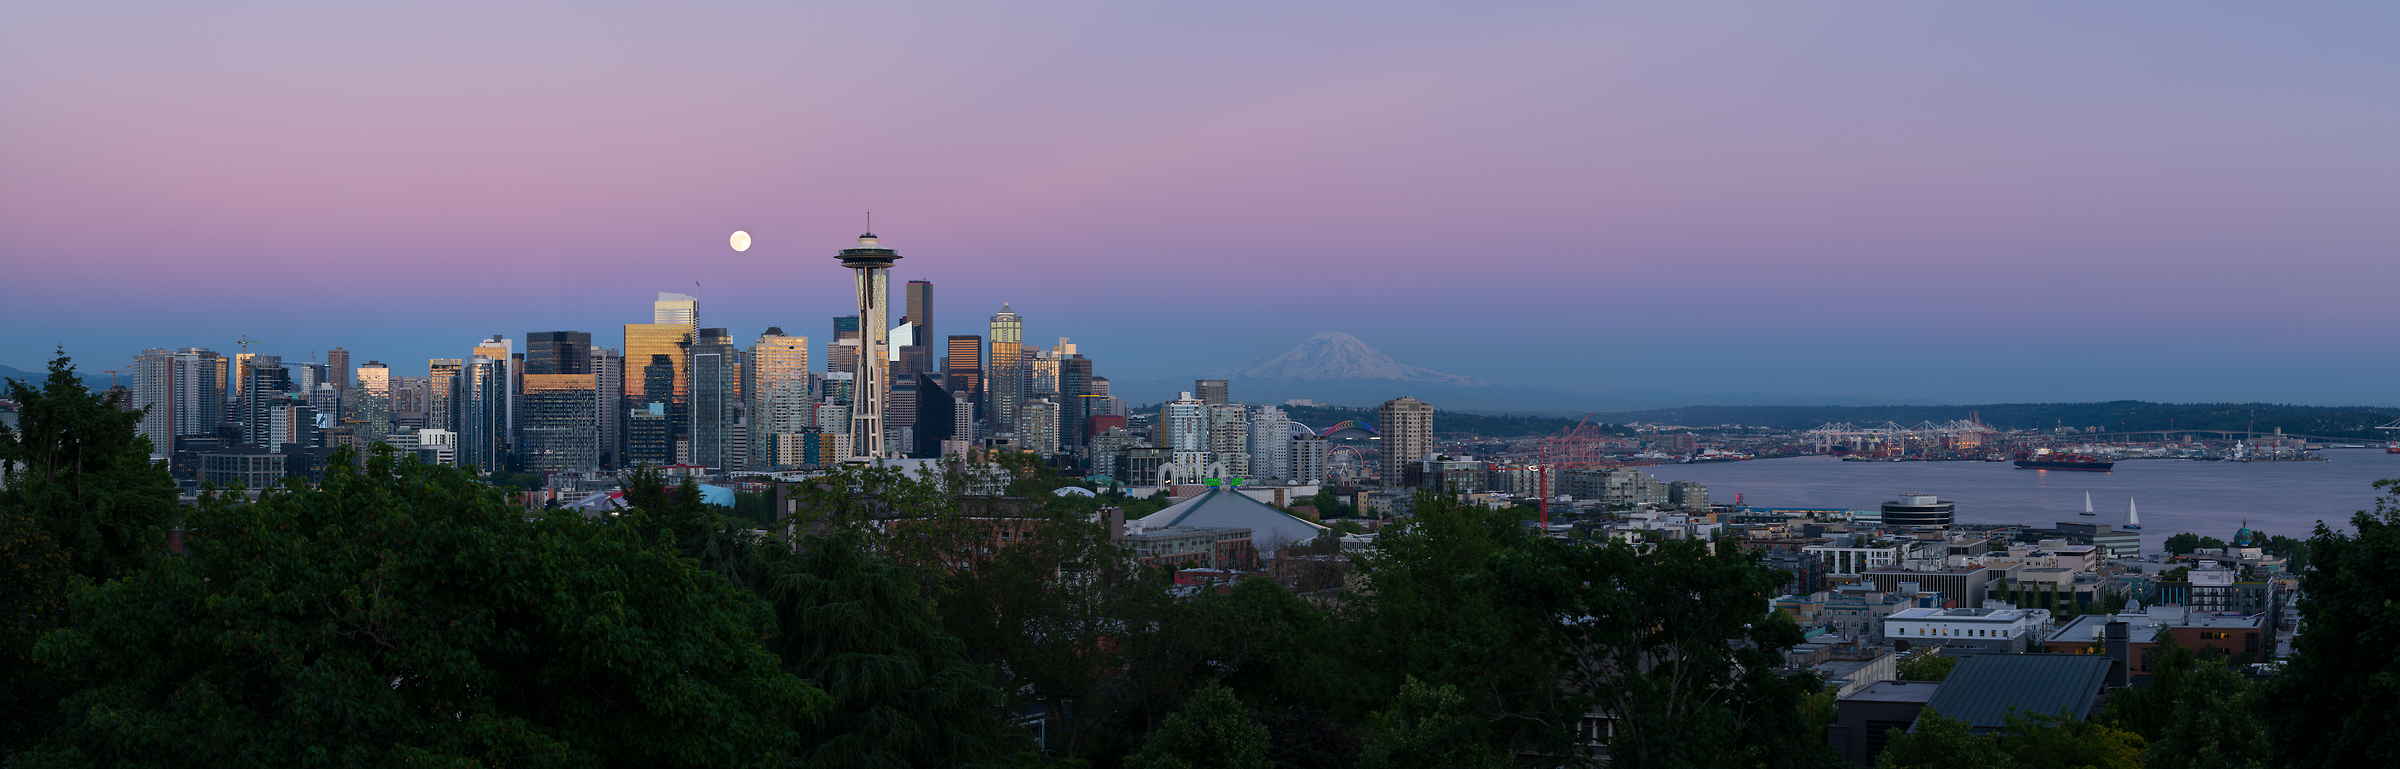 364 megapixels! A very high resolution, large-format VAST photo print of the Seattle skyline at dusk with the moon and Mt. Rainier in the background; photograph created by Greg Probst in Seattle, WA.